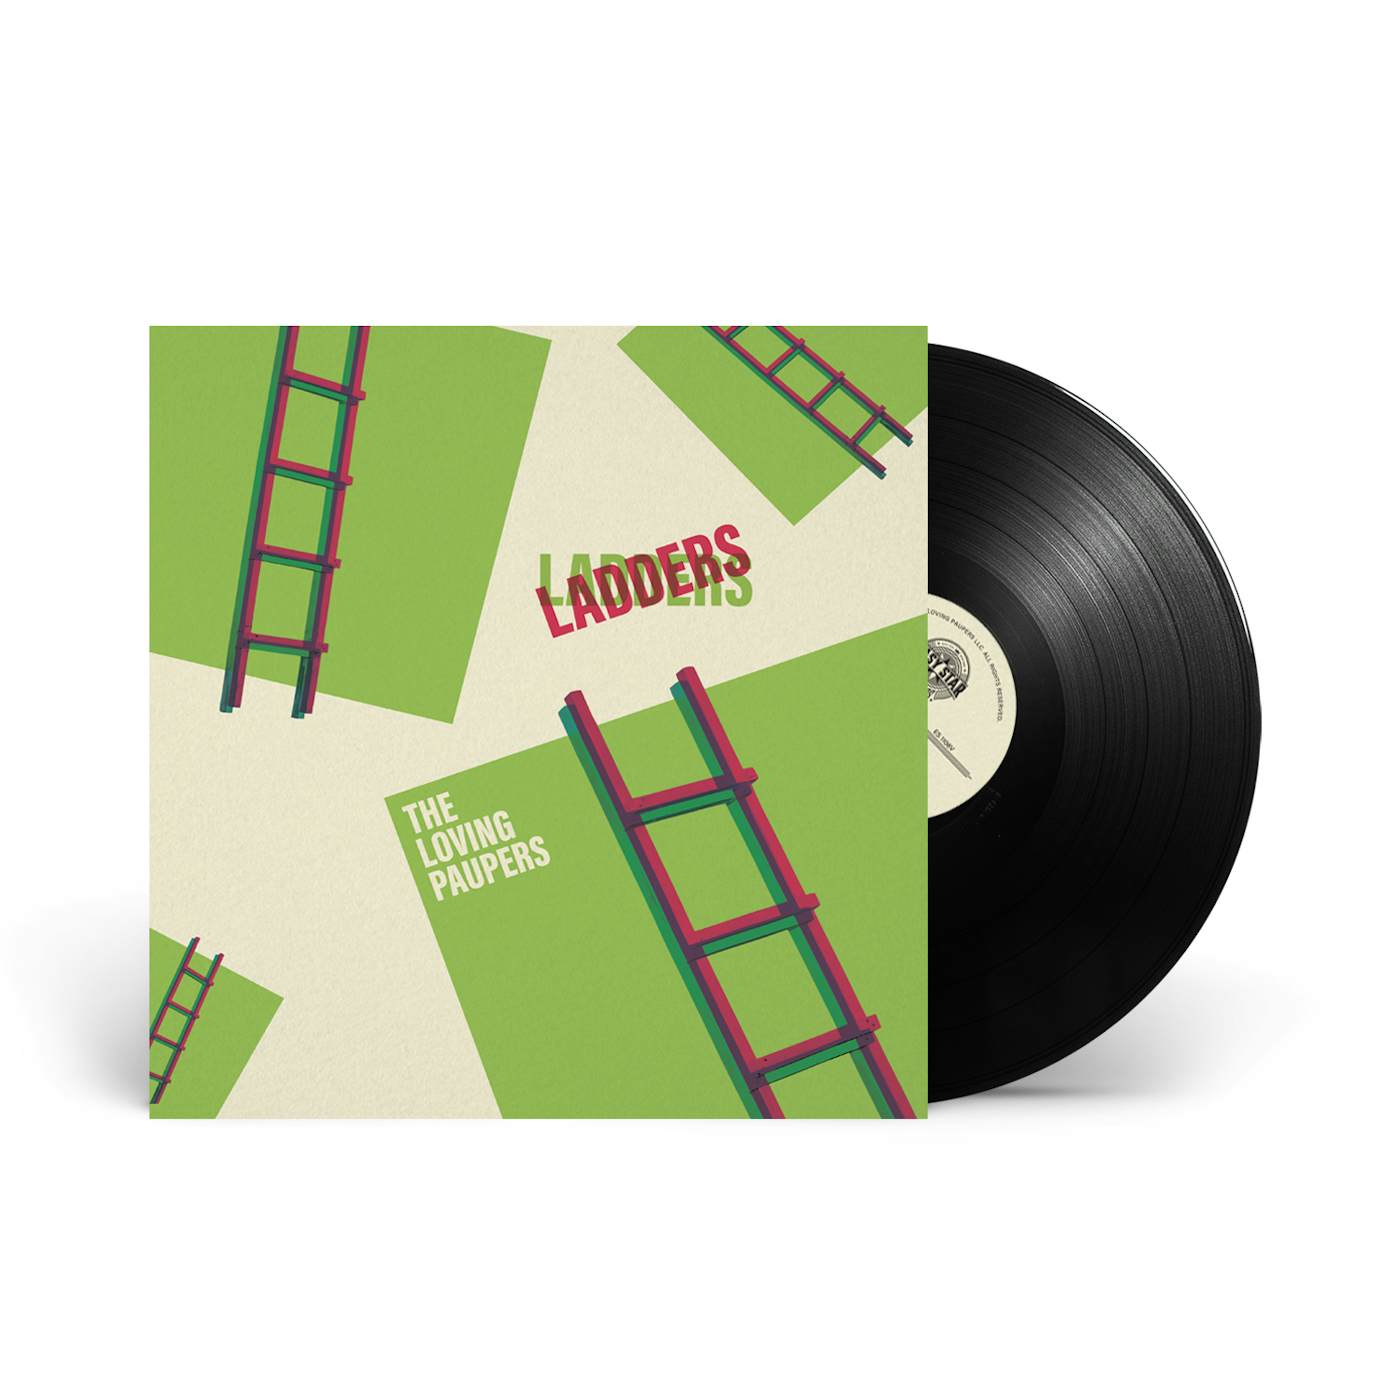 Easy Star Records The Loving Paupers: LADDERS LP (Vinyl)